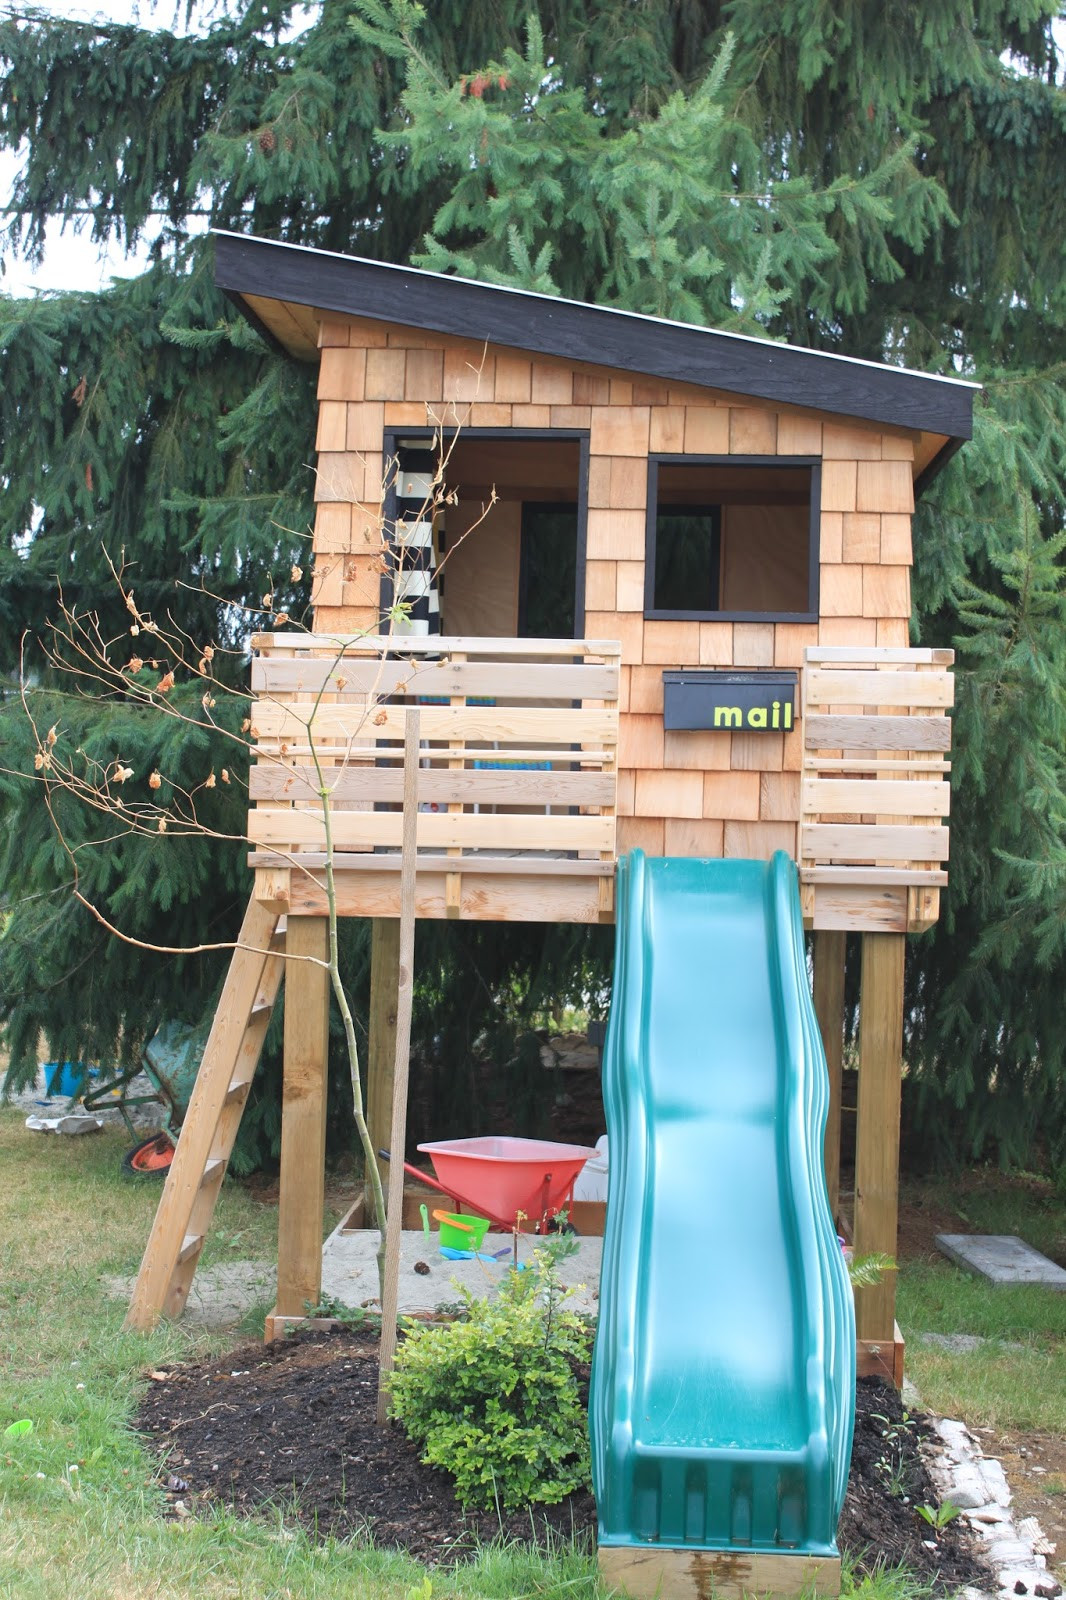 Backyard Play House
 15 Pimped Out Playhouses Your Kids Need In The Backyard